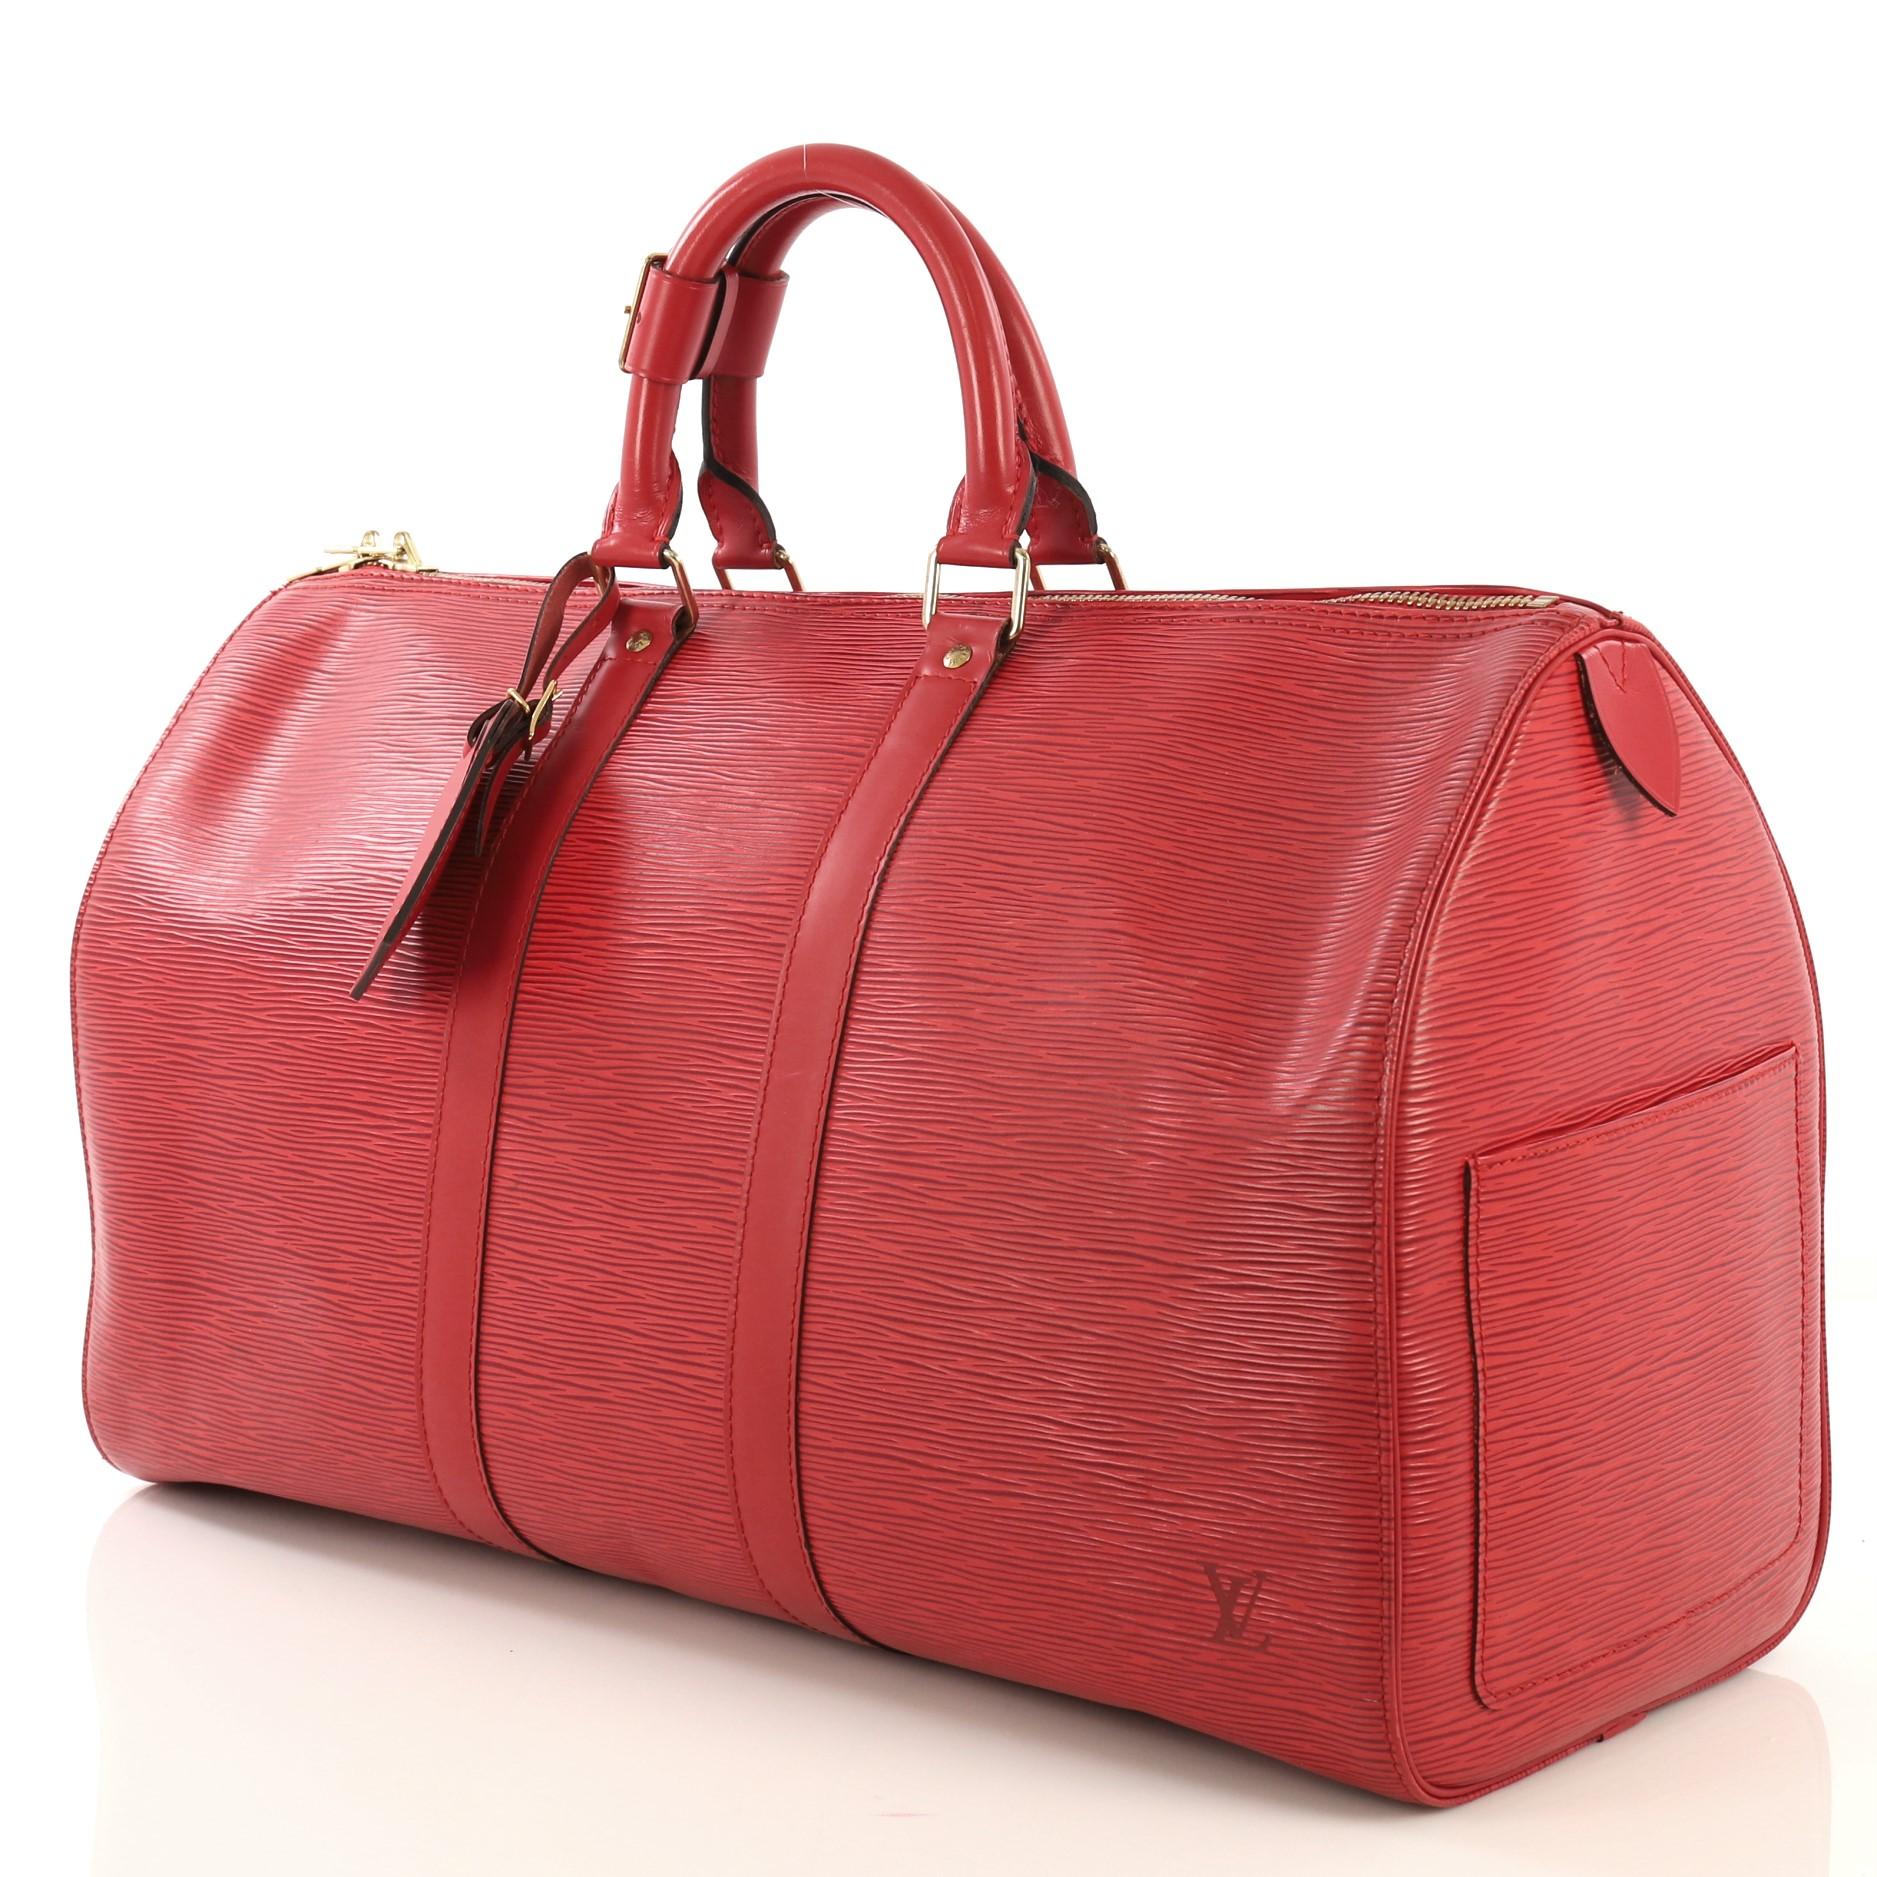 Red Louis Vuitton Keepall Bag Epi Leather 45